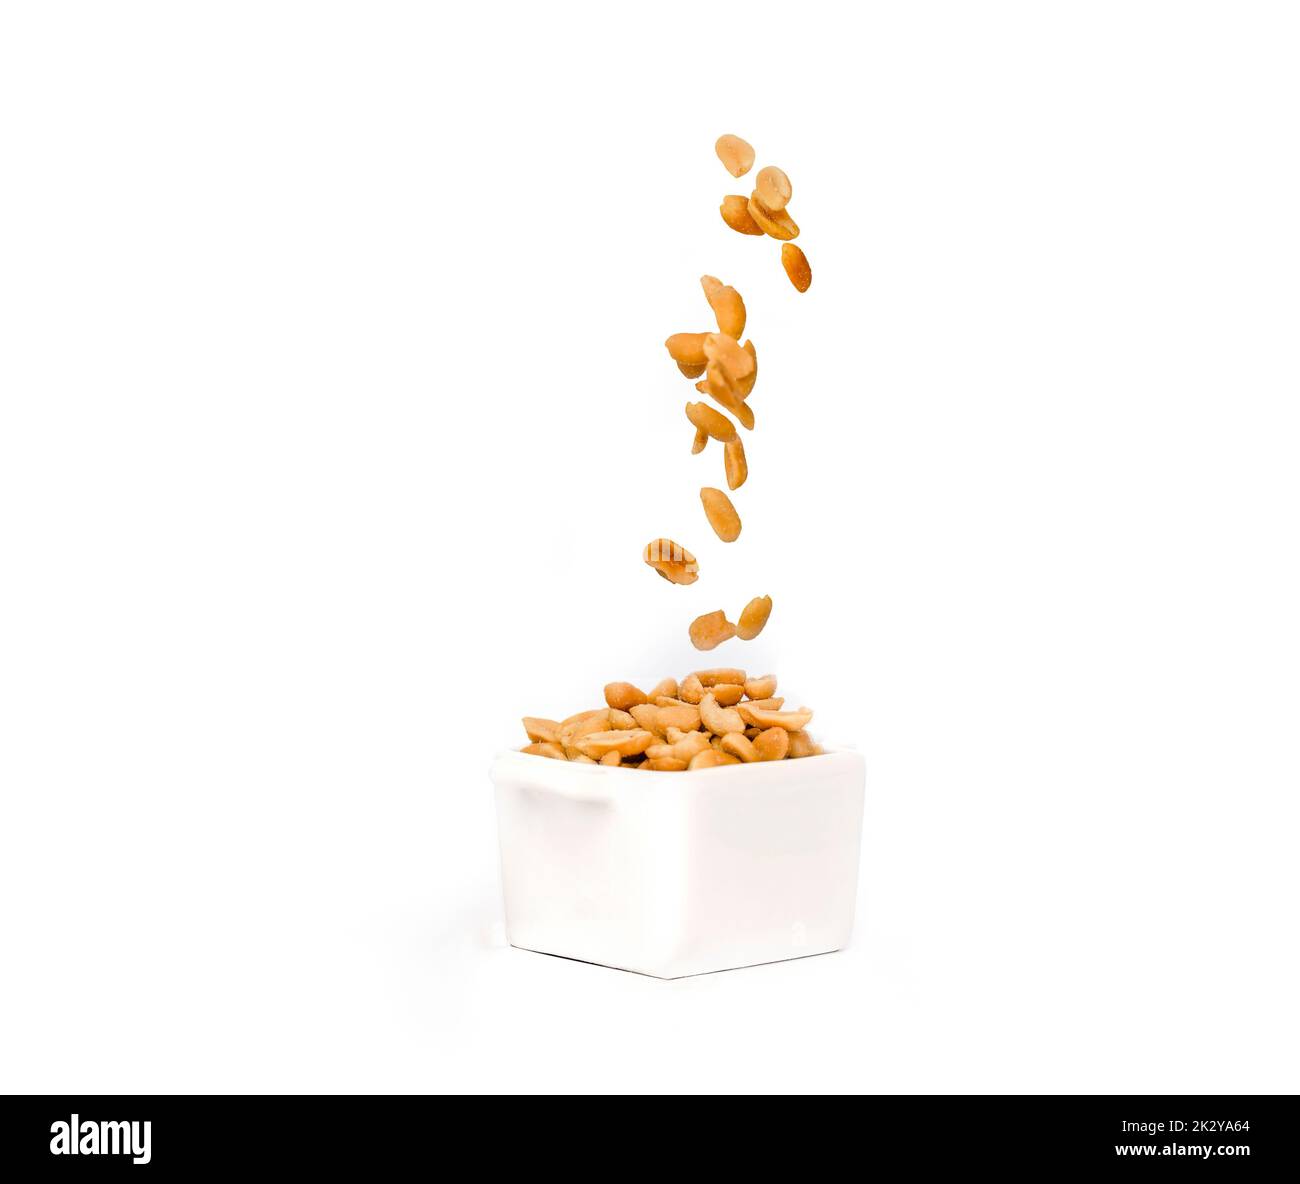 Salted peanuts falling o into a pot full of peanuts.  Isolated against white background Stock Photo